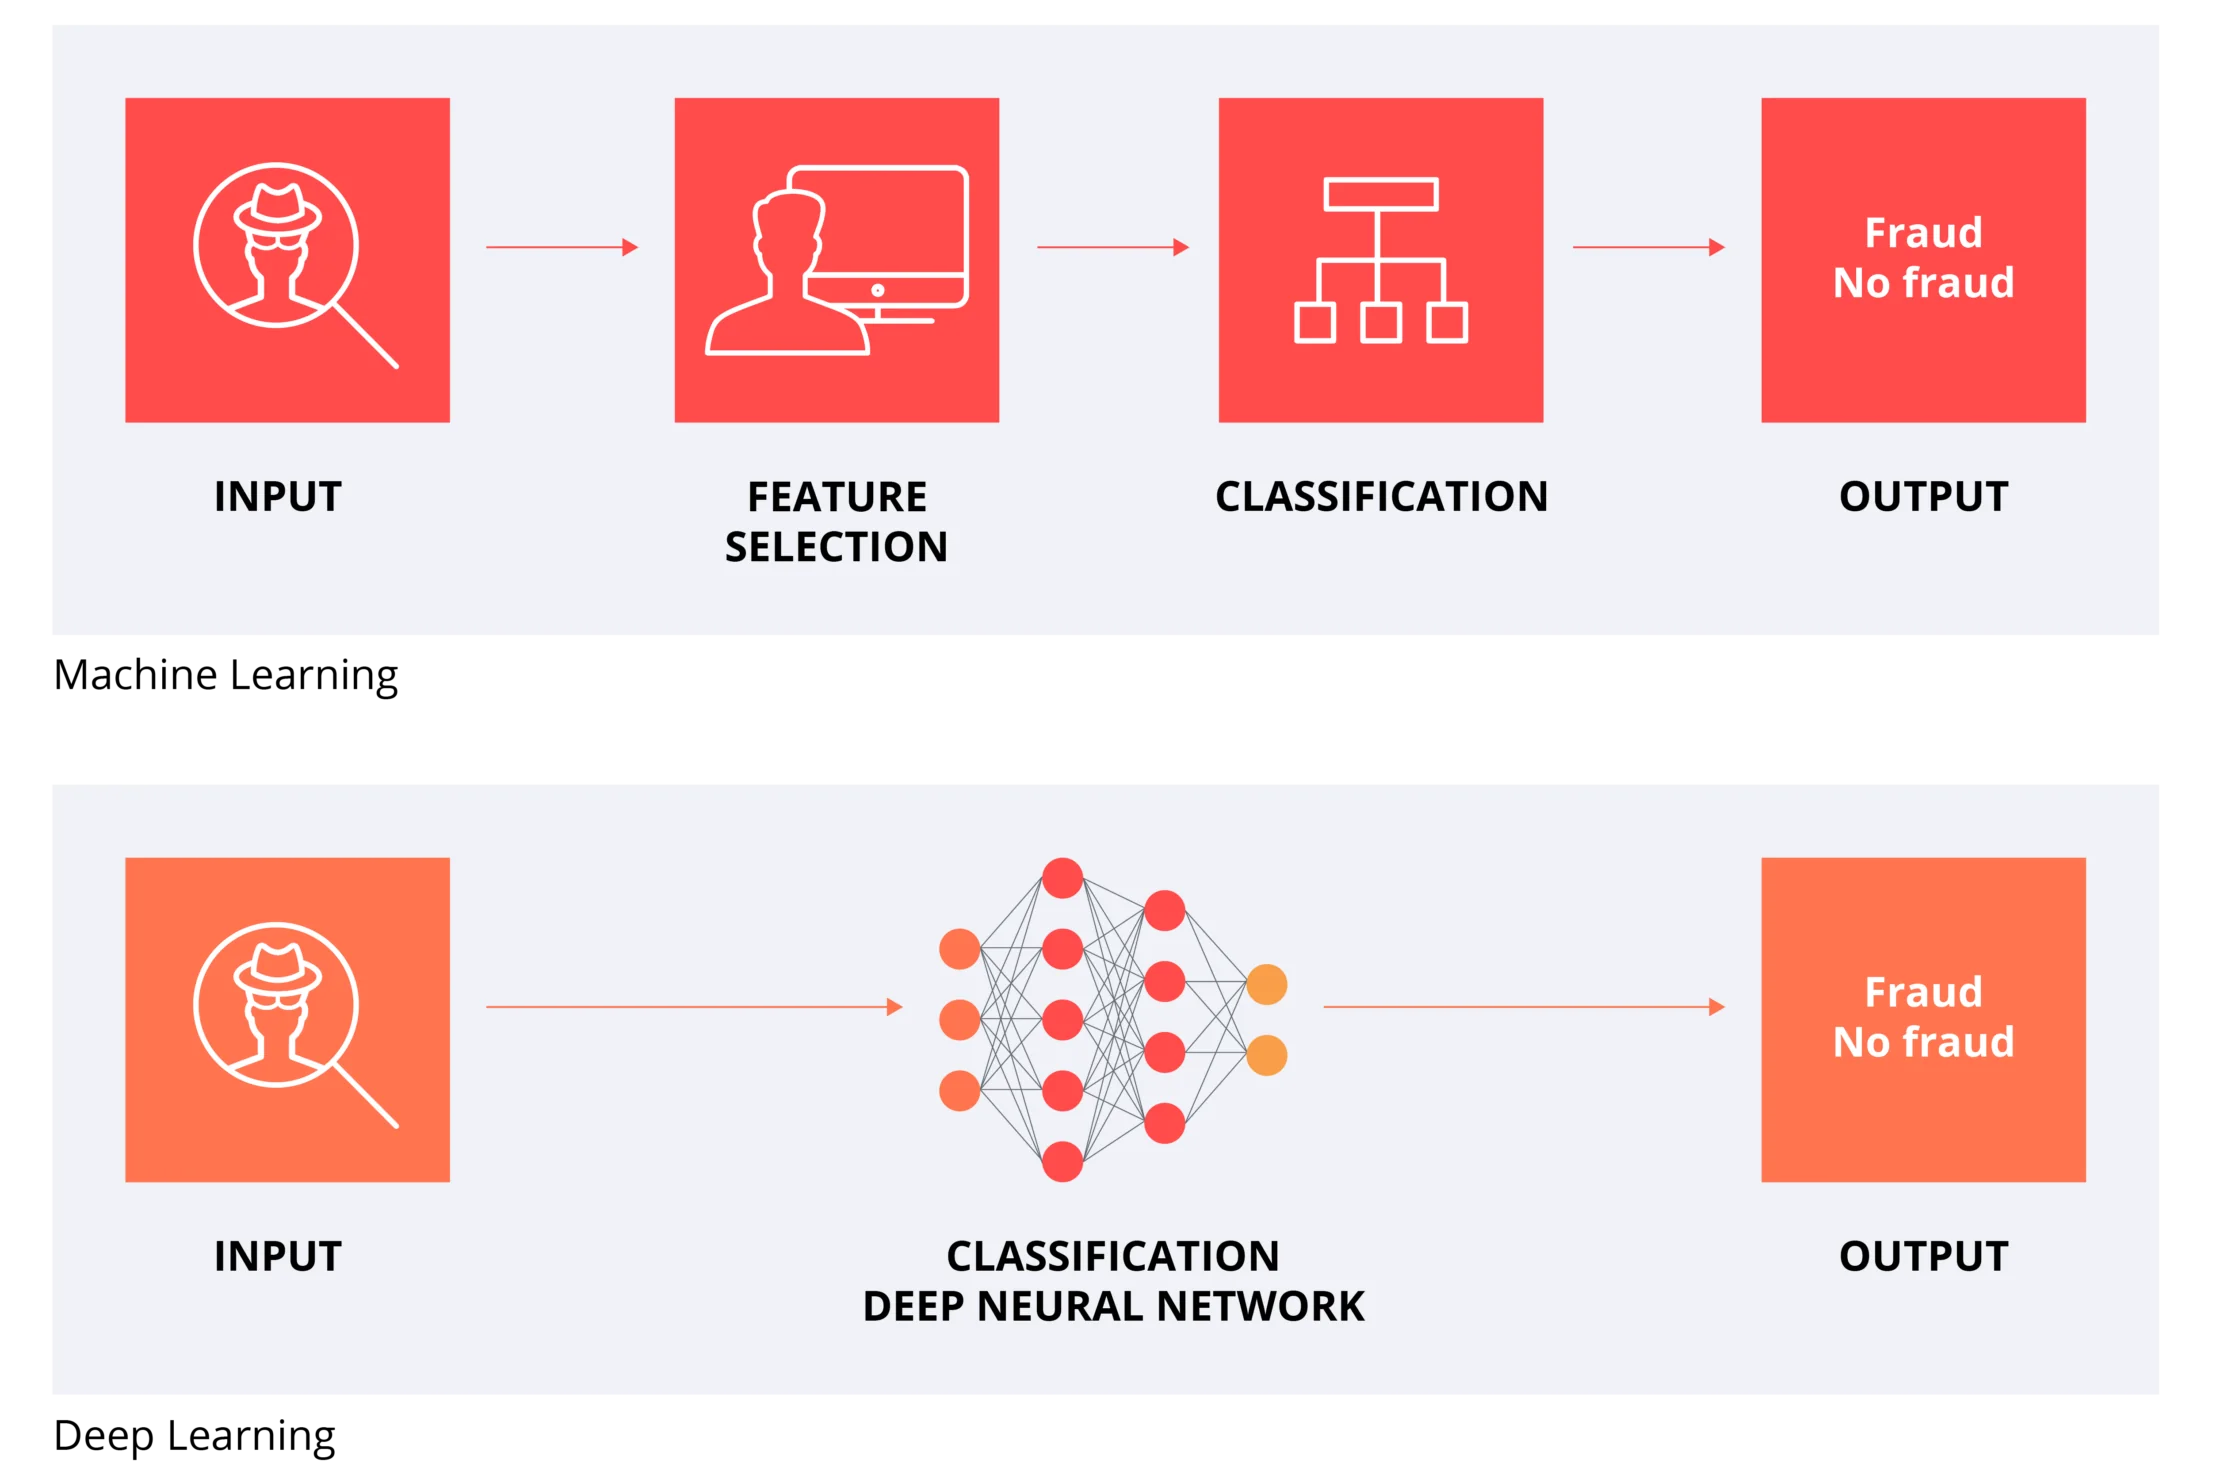 This diagram illustrates a Deep Learning model